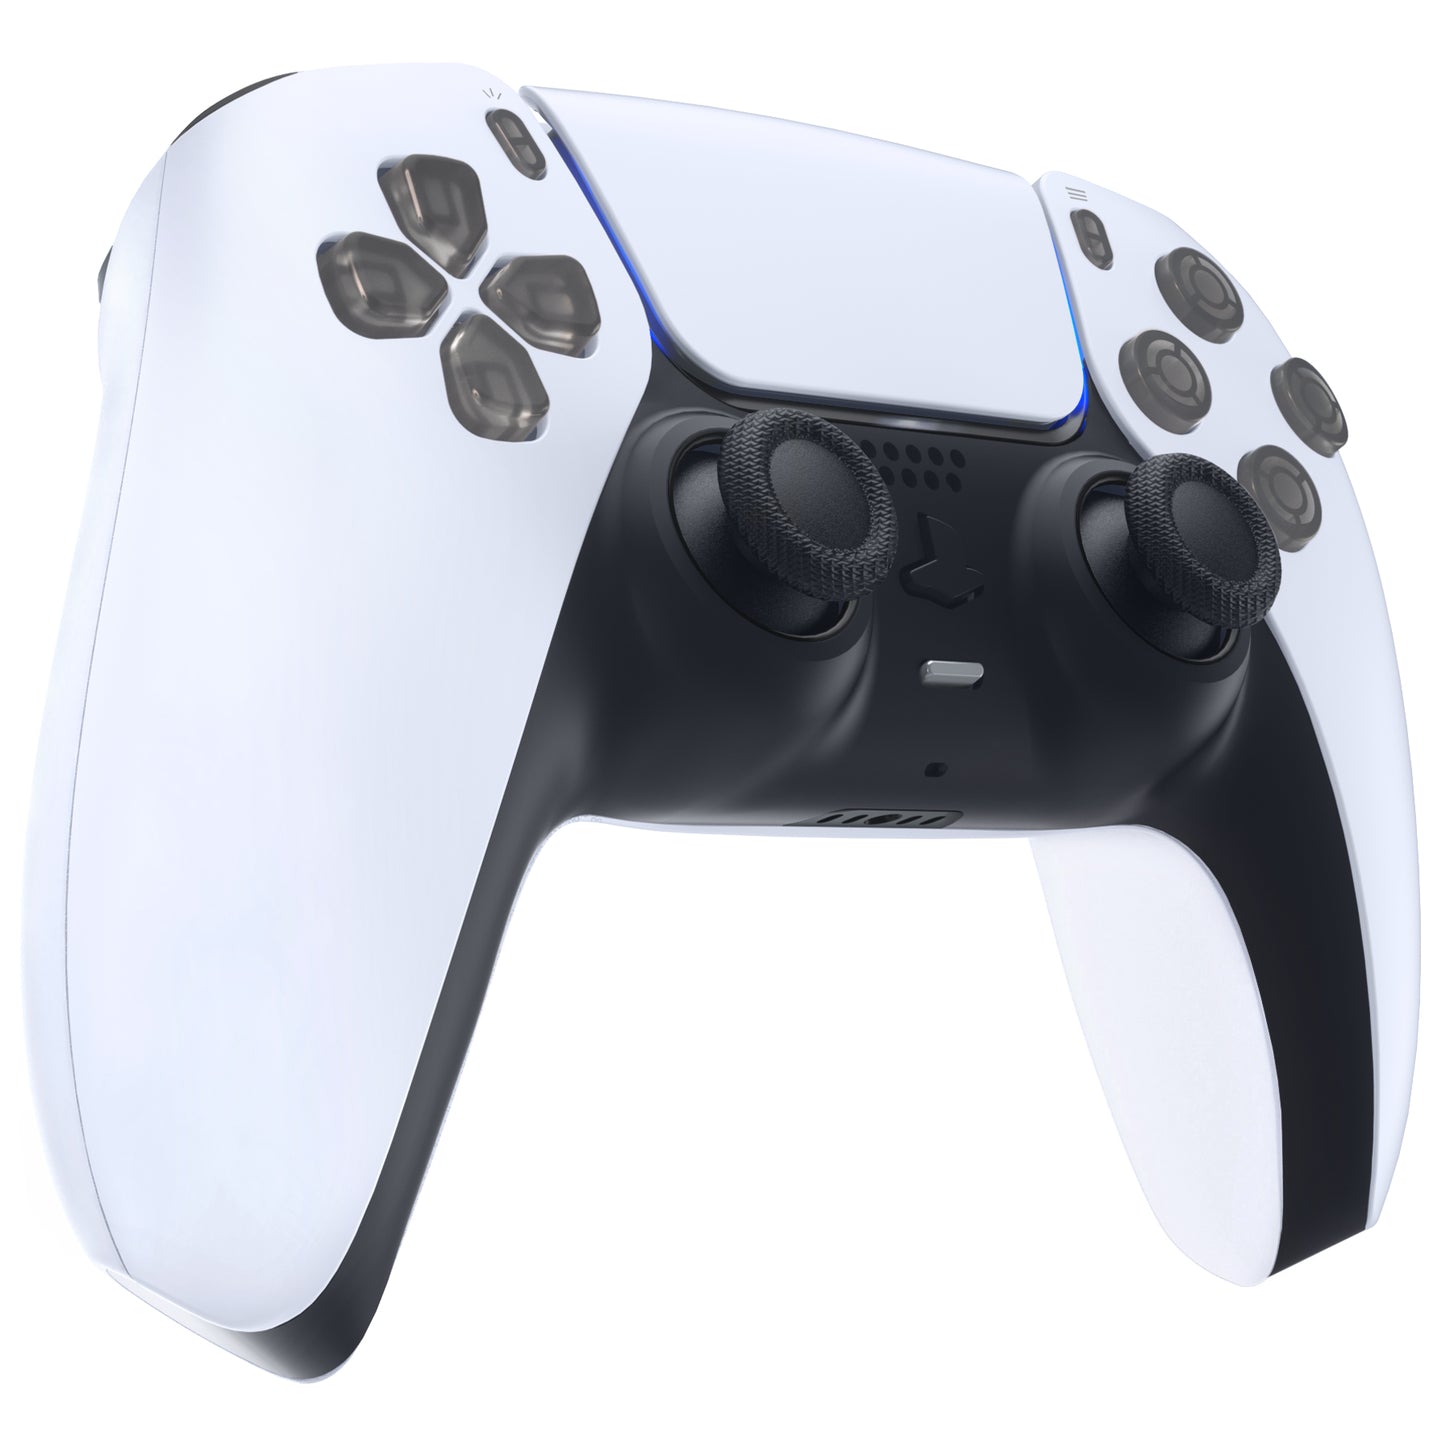 eXtremeRate Retail Replacement D-pad R1 L1 R2 L2 Triggers Share Options Face Buttons, Clear Black Full Set Buttons Compatible With ps5 Controller BDM-010 & BDM-020 - JPF3023G2